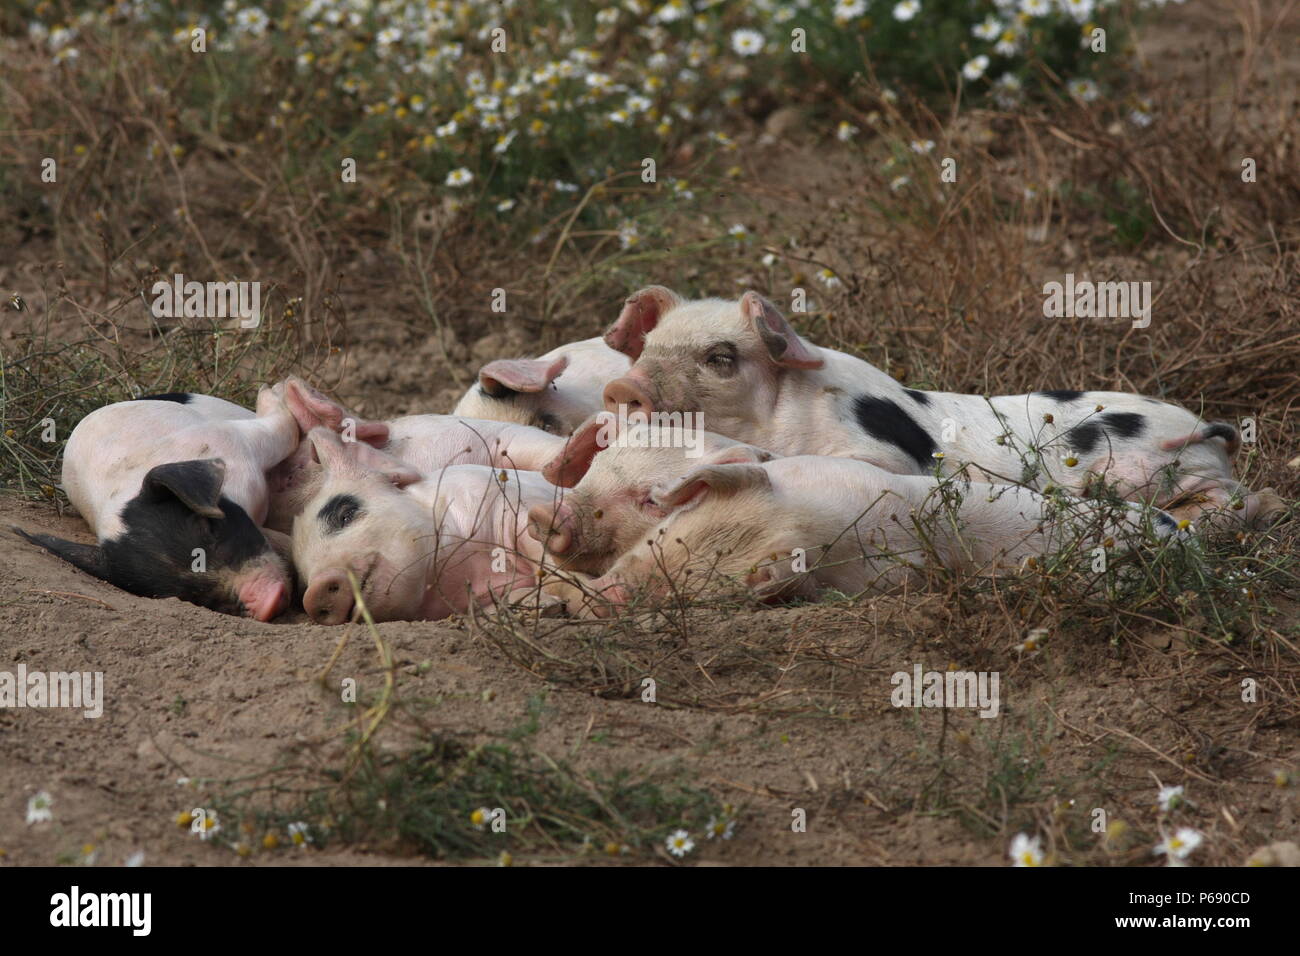 Piglets, at rest, in a natural field, farming in a human way, rearing for meat, these pigs have a good life Stock Photo